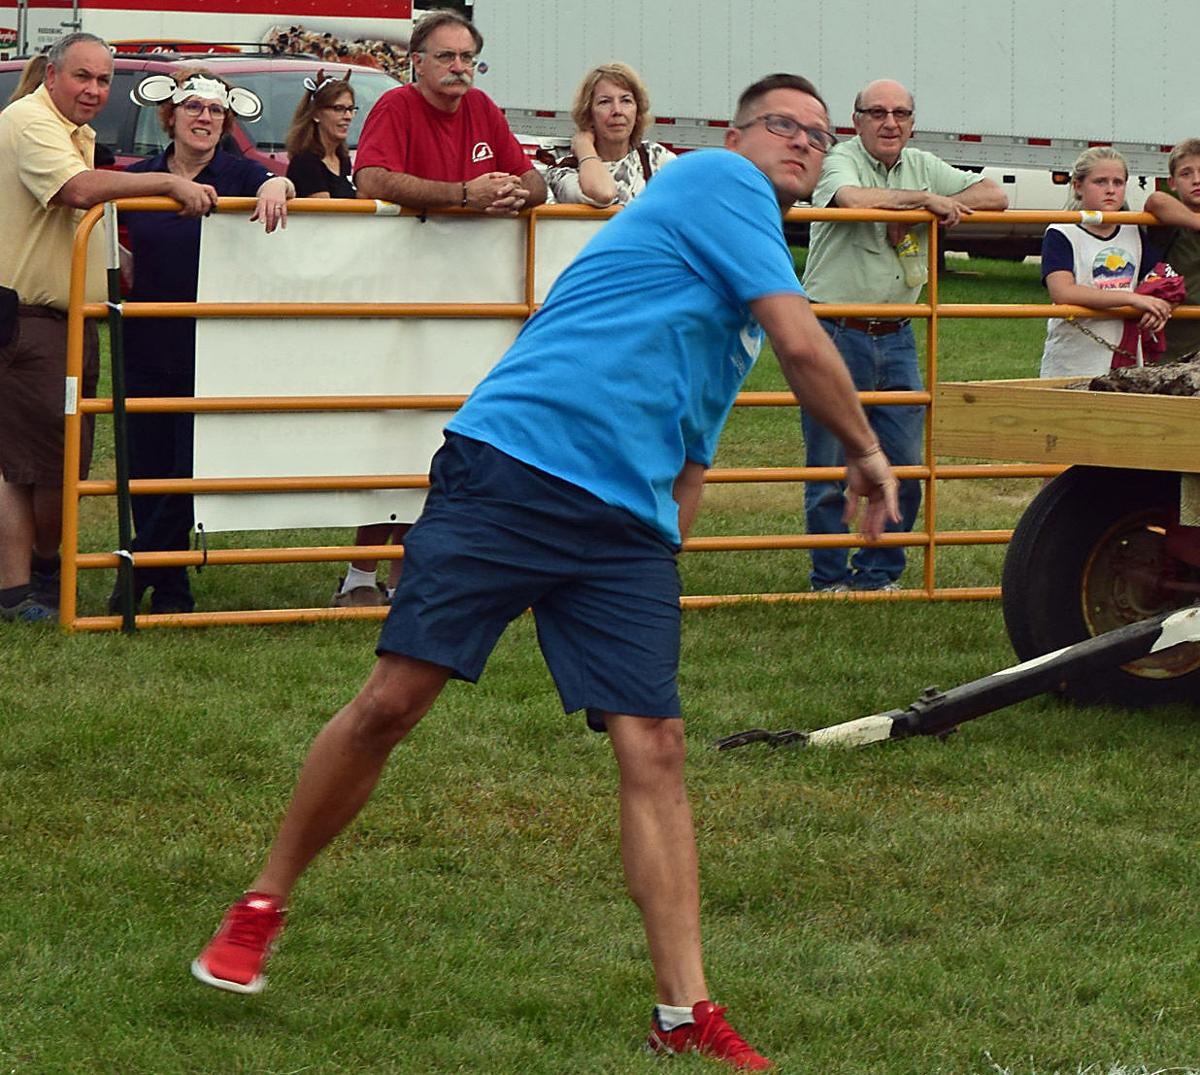 Tens of thousands attend 44th annual Cow Chip Festival in Prairie du